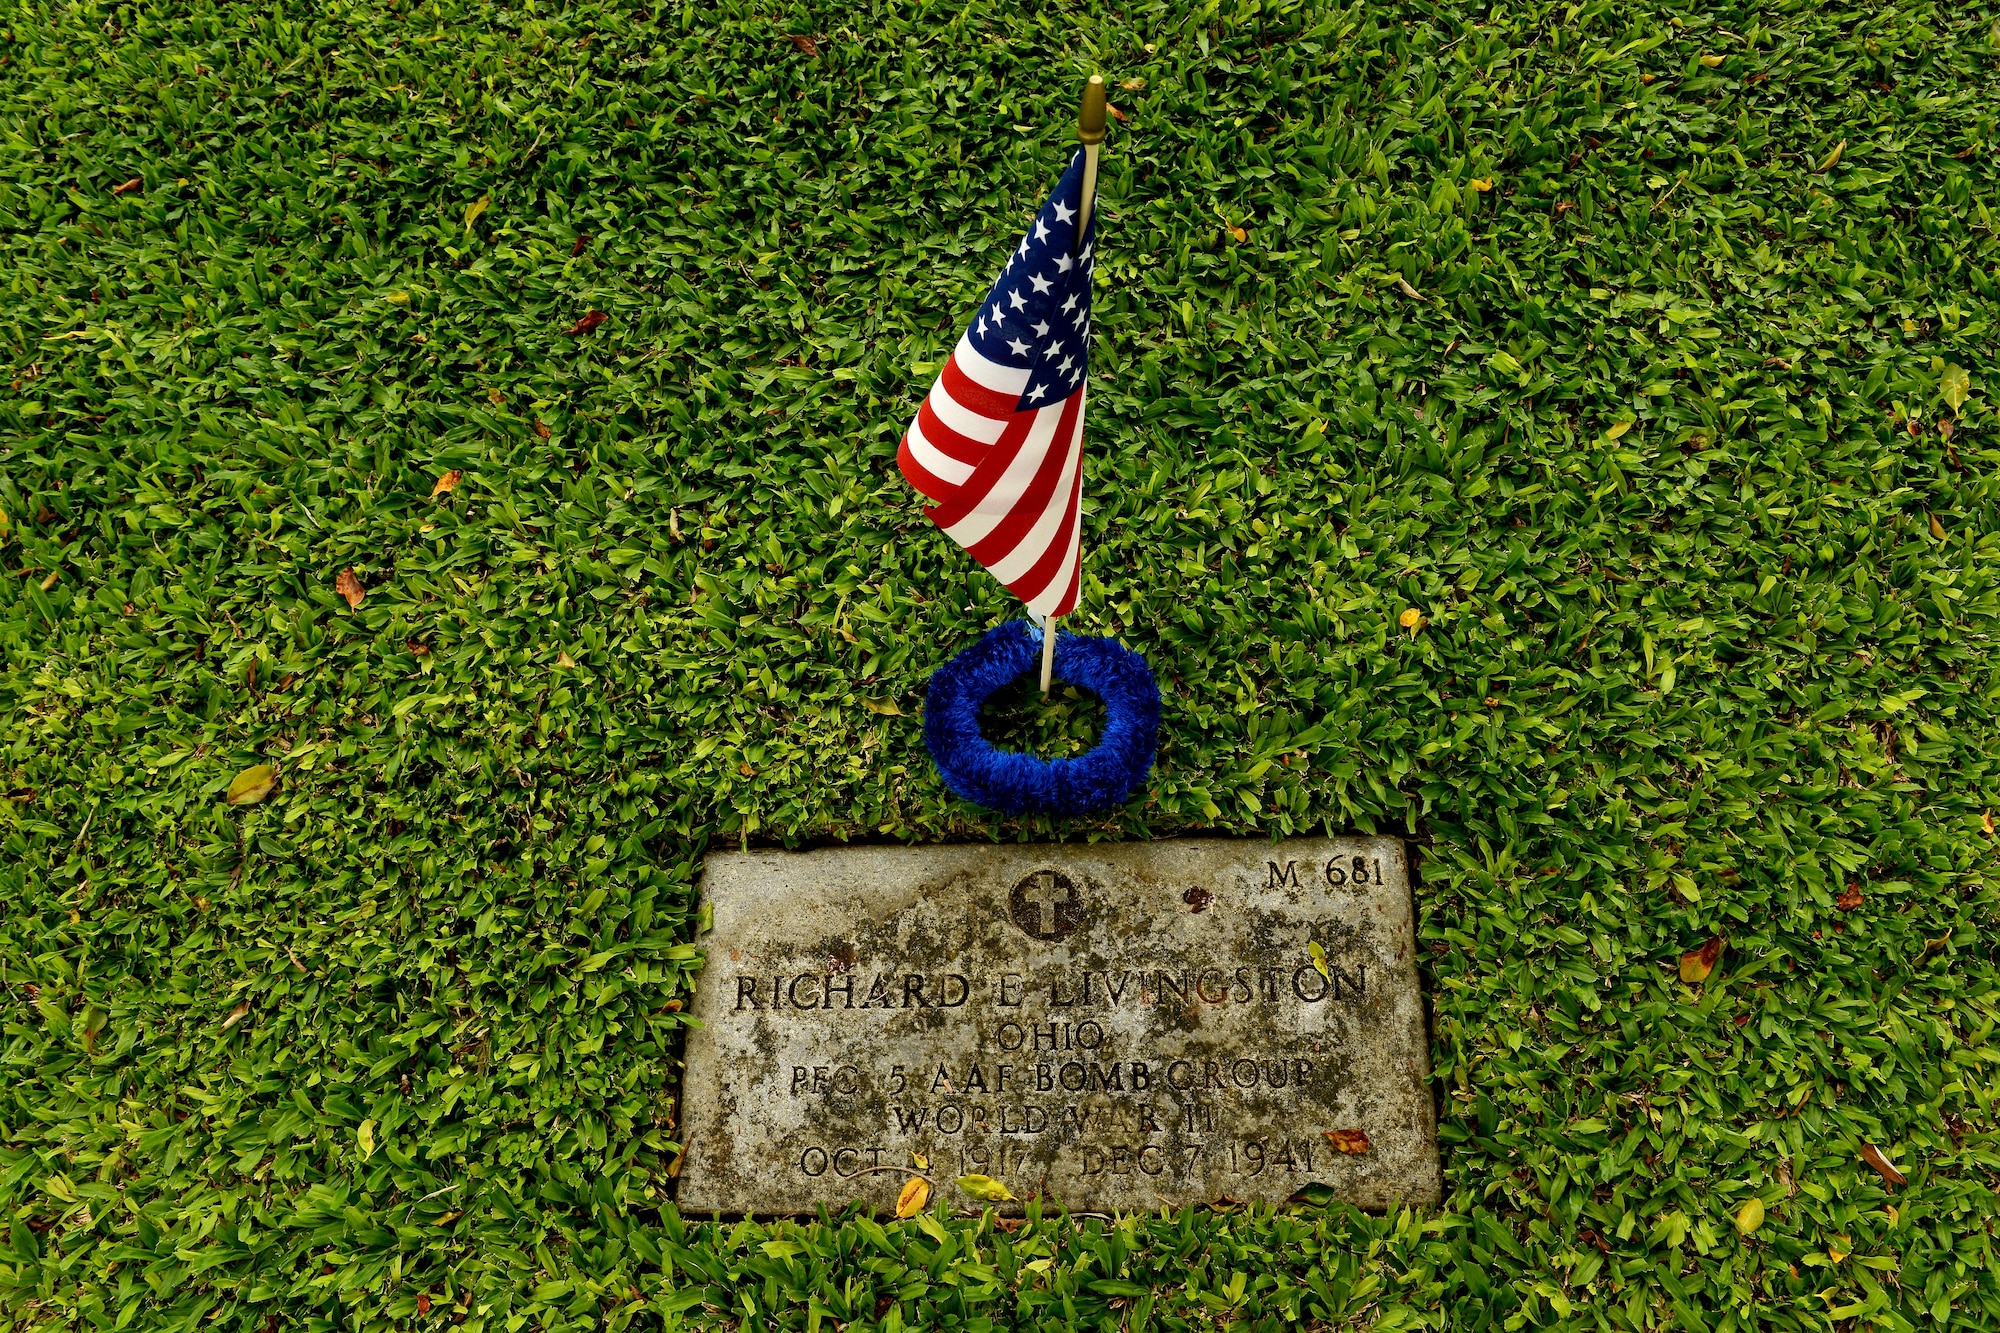 One of 92 flags and leis adorn gravesite of Army Air Forces Pfc. Richard E. Livingston, 5th Bomb Group, Hickam Field, at the National Cemetery of the Pacific, at Punchbowl in Honolulu, to honor of his sacrifice as he was killed during the Dec. 7, 1941, attacks on Oahu.  Jessie Higa, volunteer historian and president of the Hickam History Club, directed a team of volunteers Dec. 2, 2012, to honor the men who were killed on that infamous day. Higa and a team of teenagers from a local school started placing flags last year as a community service project. (U.S. Air Force photo/Staff Sgt. Mike Meares)